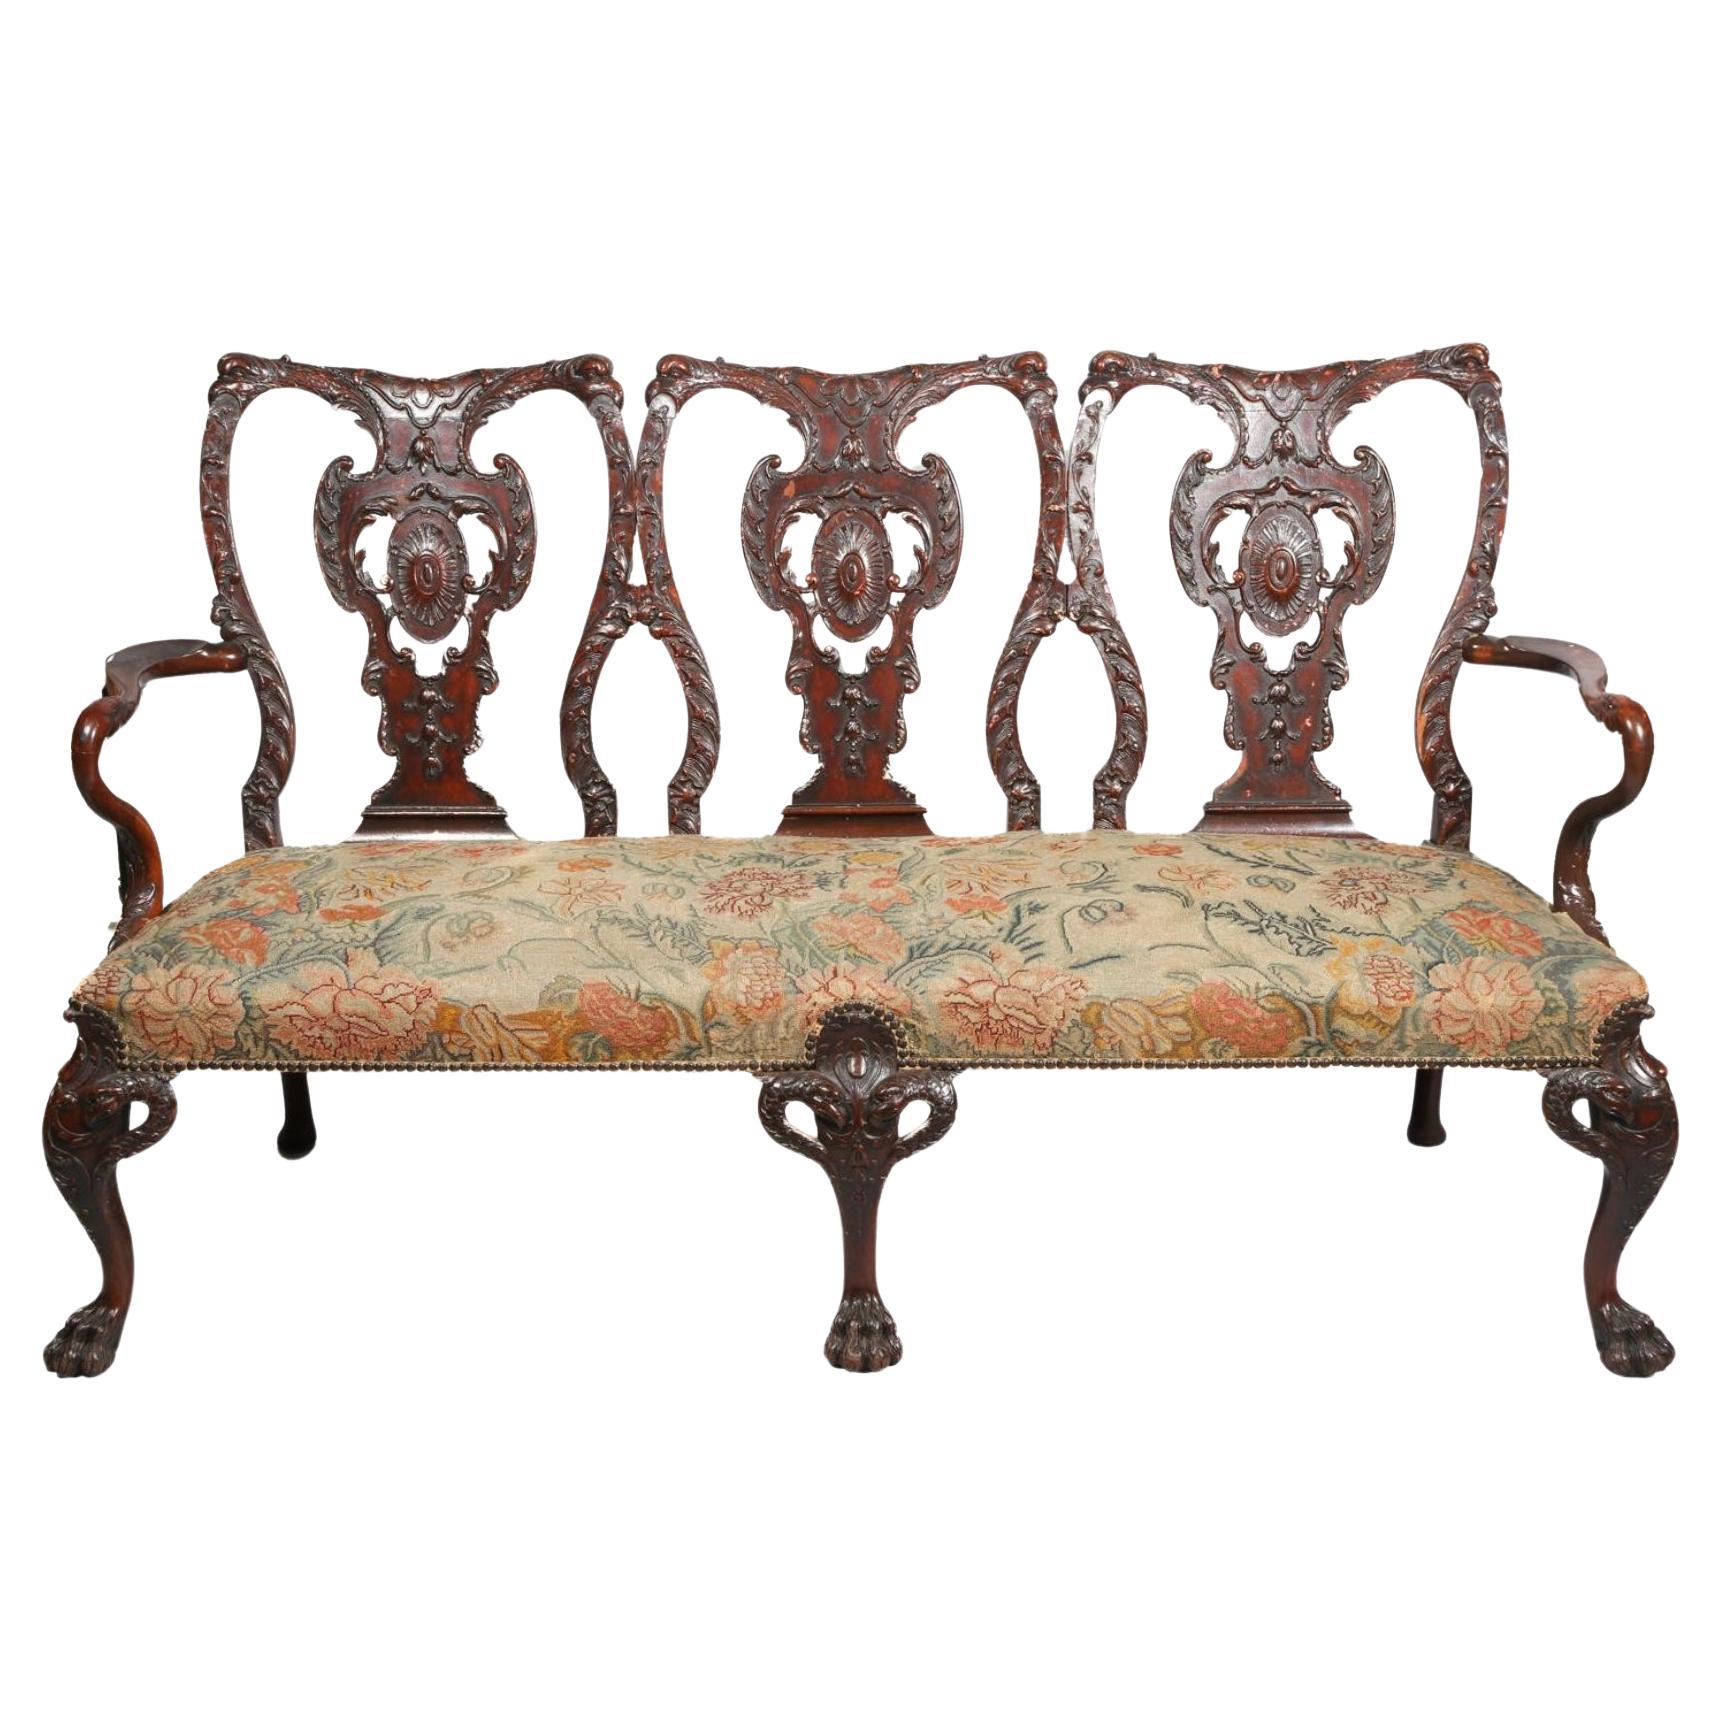 George II Revival triple back settee was created in the style of the beloved Thomas Chippendale. From the scaled and scalloped back and zoomorphic armrests to the hairy ball-and-claw feet, the quality of the carving is deep and richly detailed.